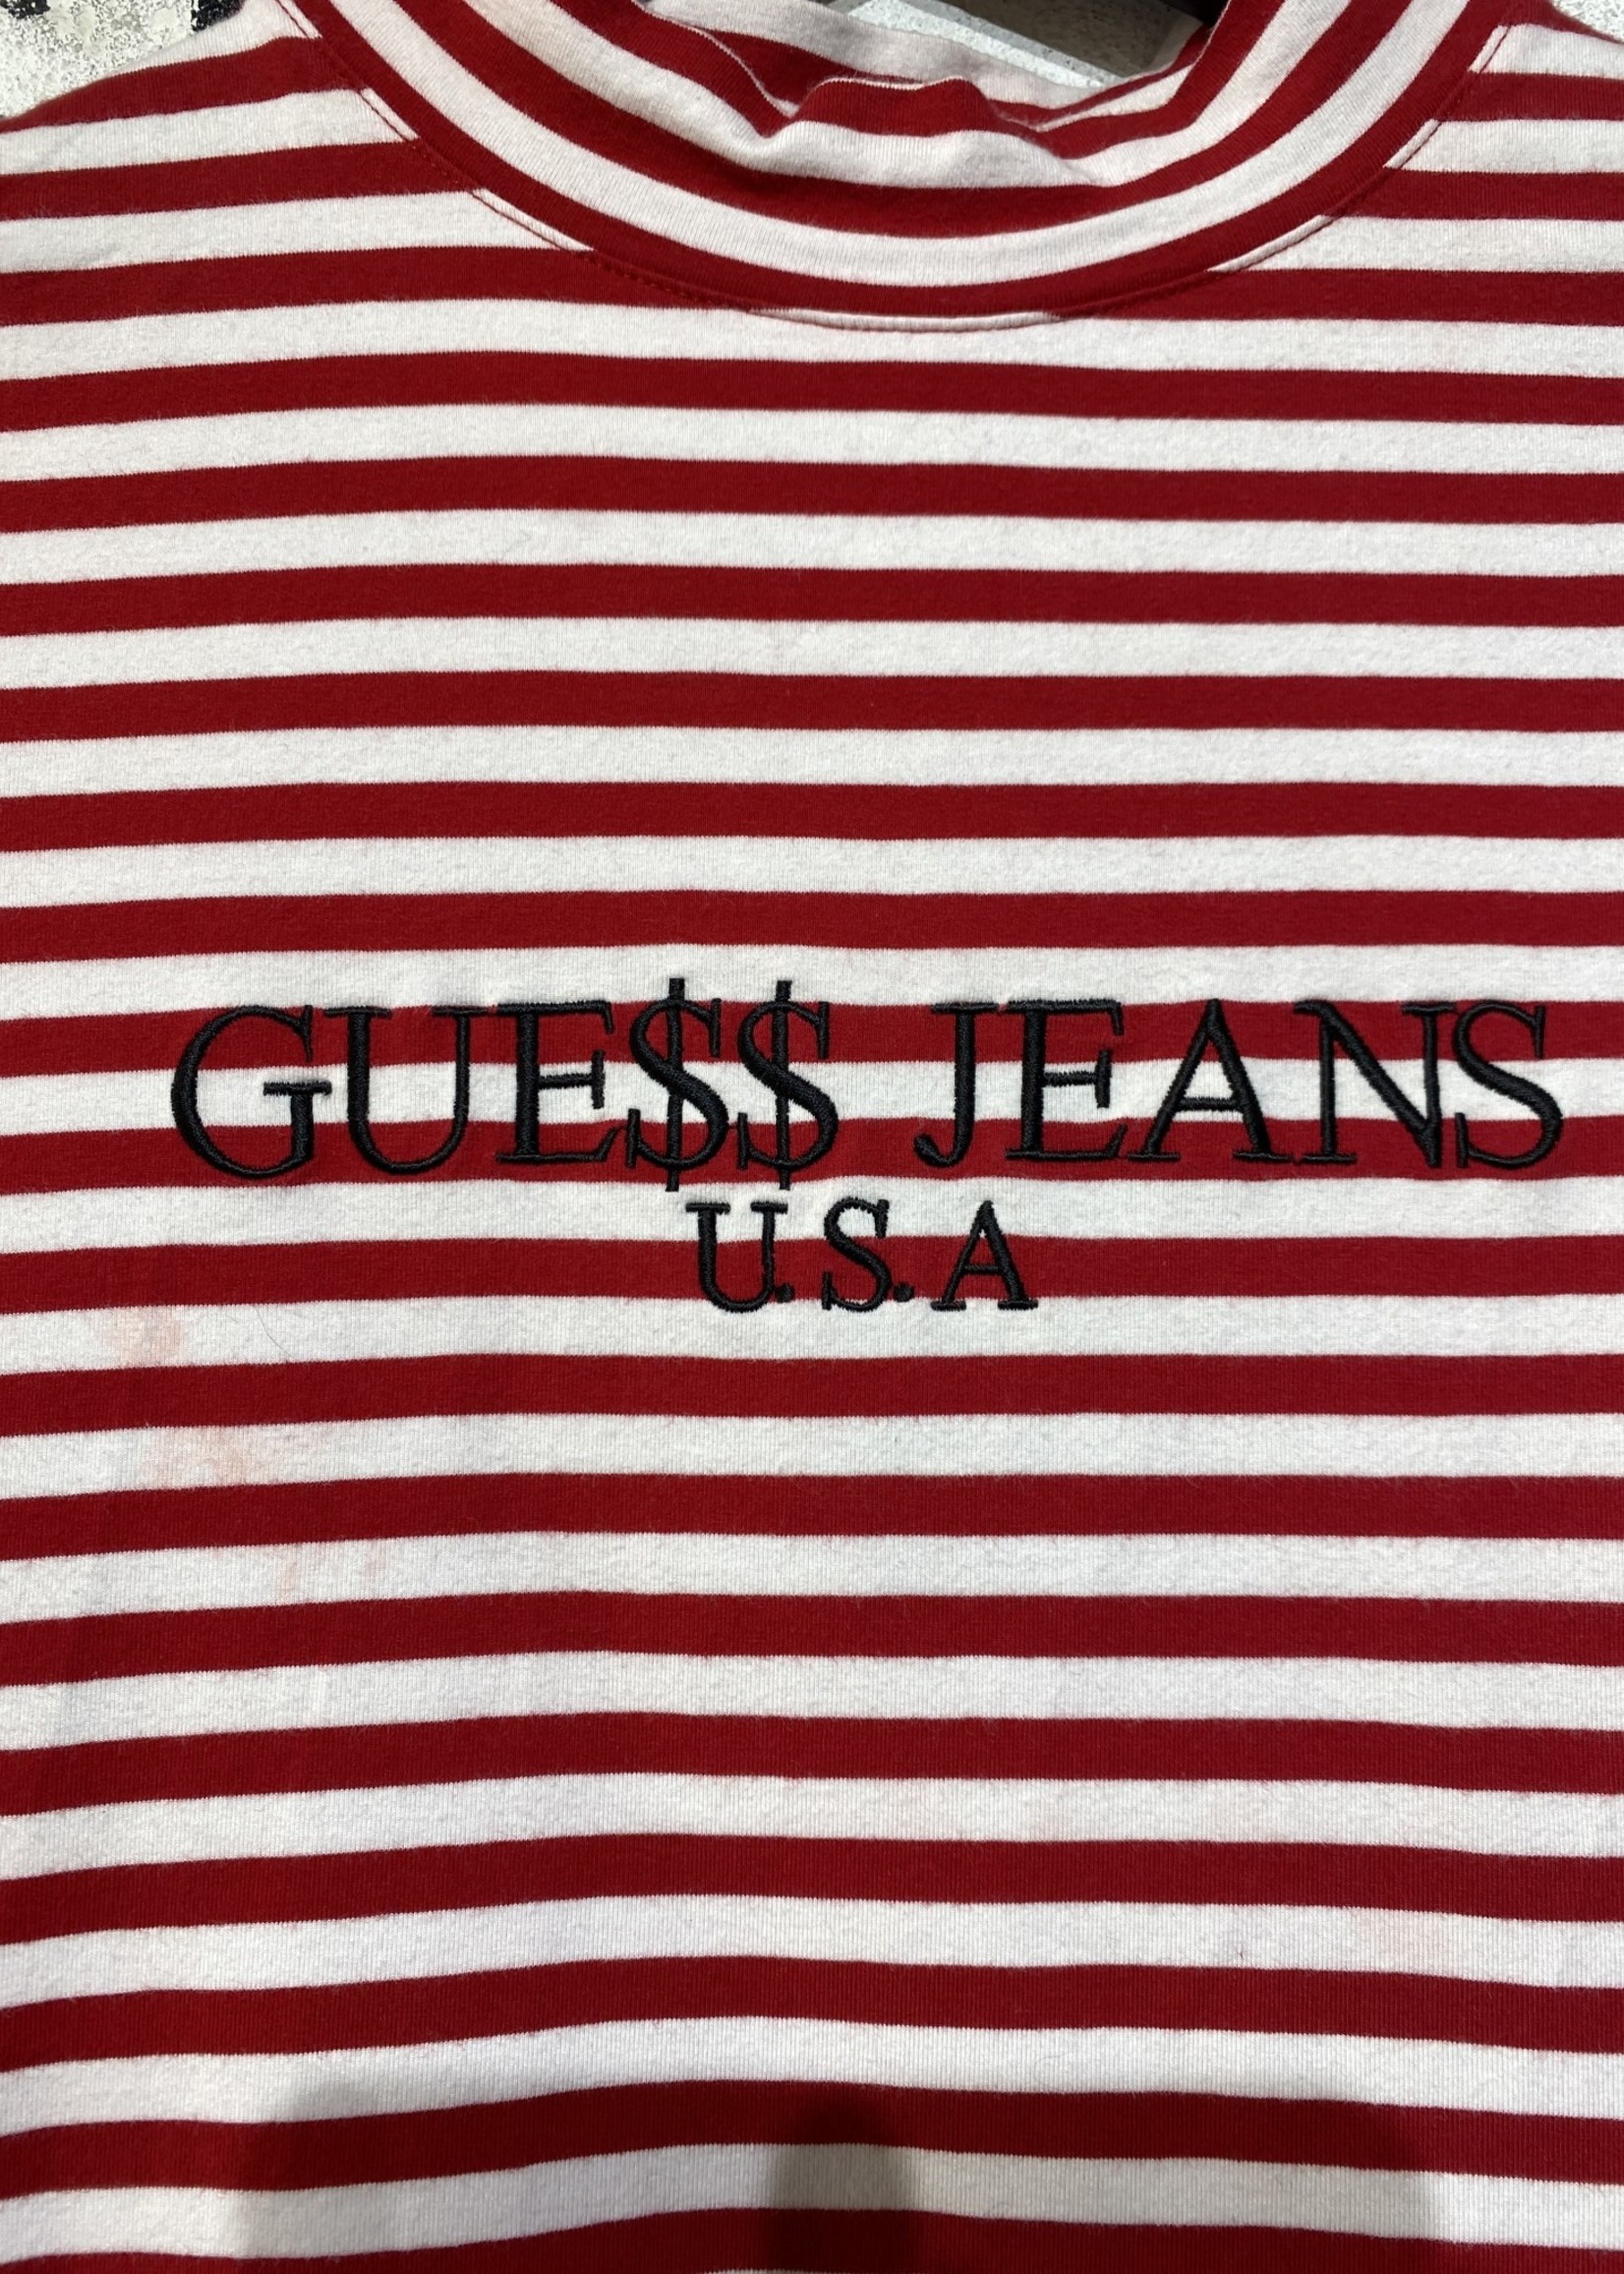 Guess Jeans ASAP Red White Striped Top M AS IS